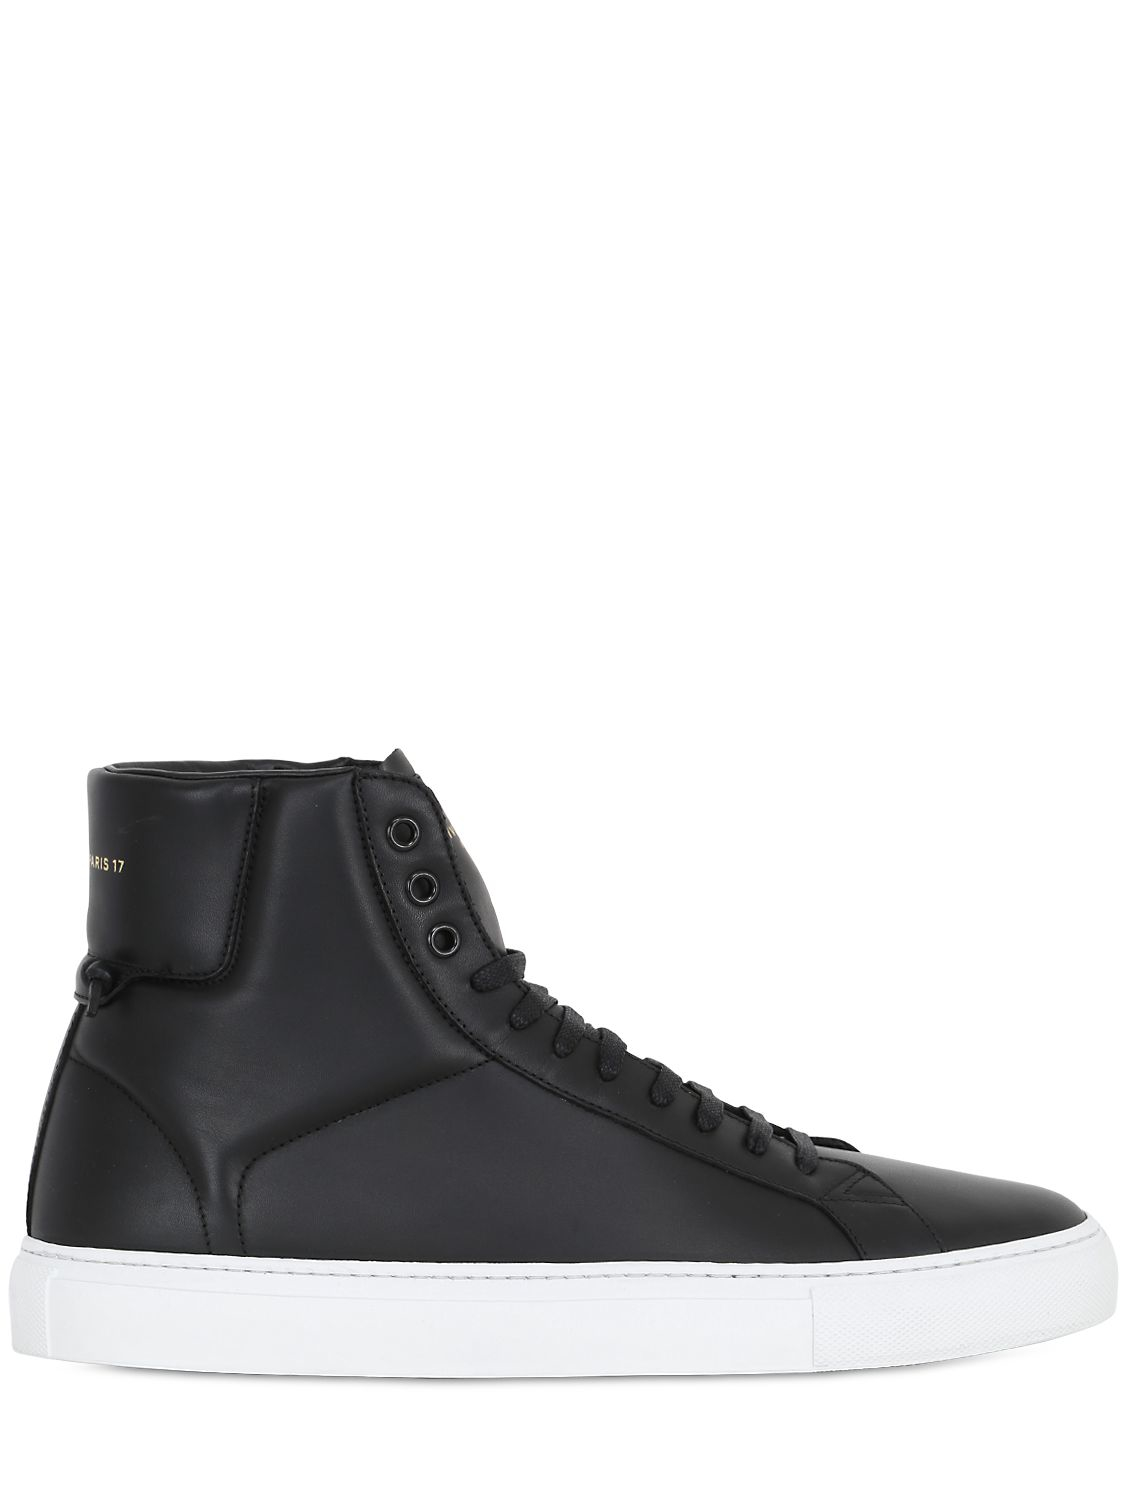 Lyst - Givenchy Urban Street Leather High Top Sneakers in Black for Men